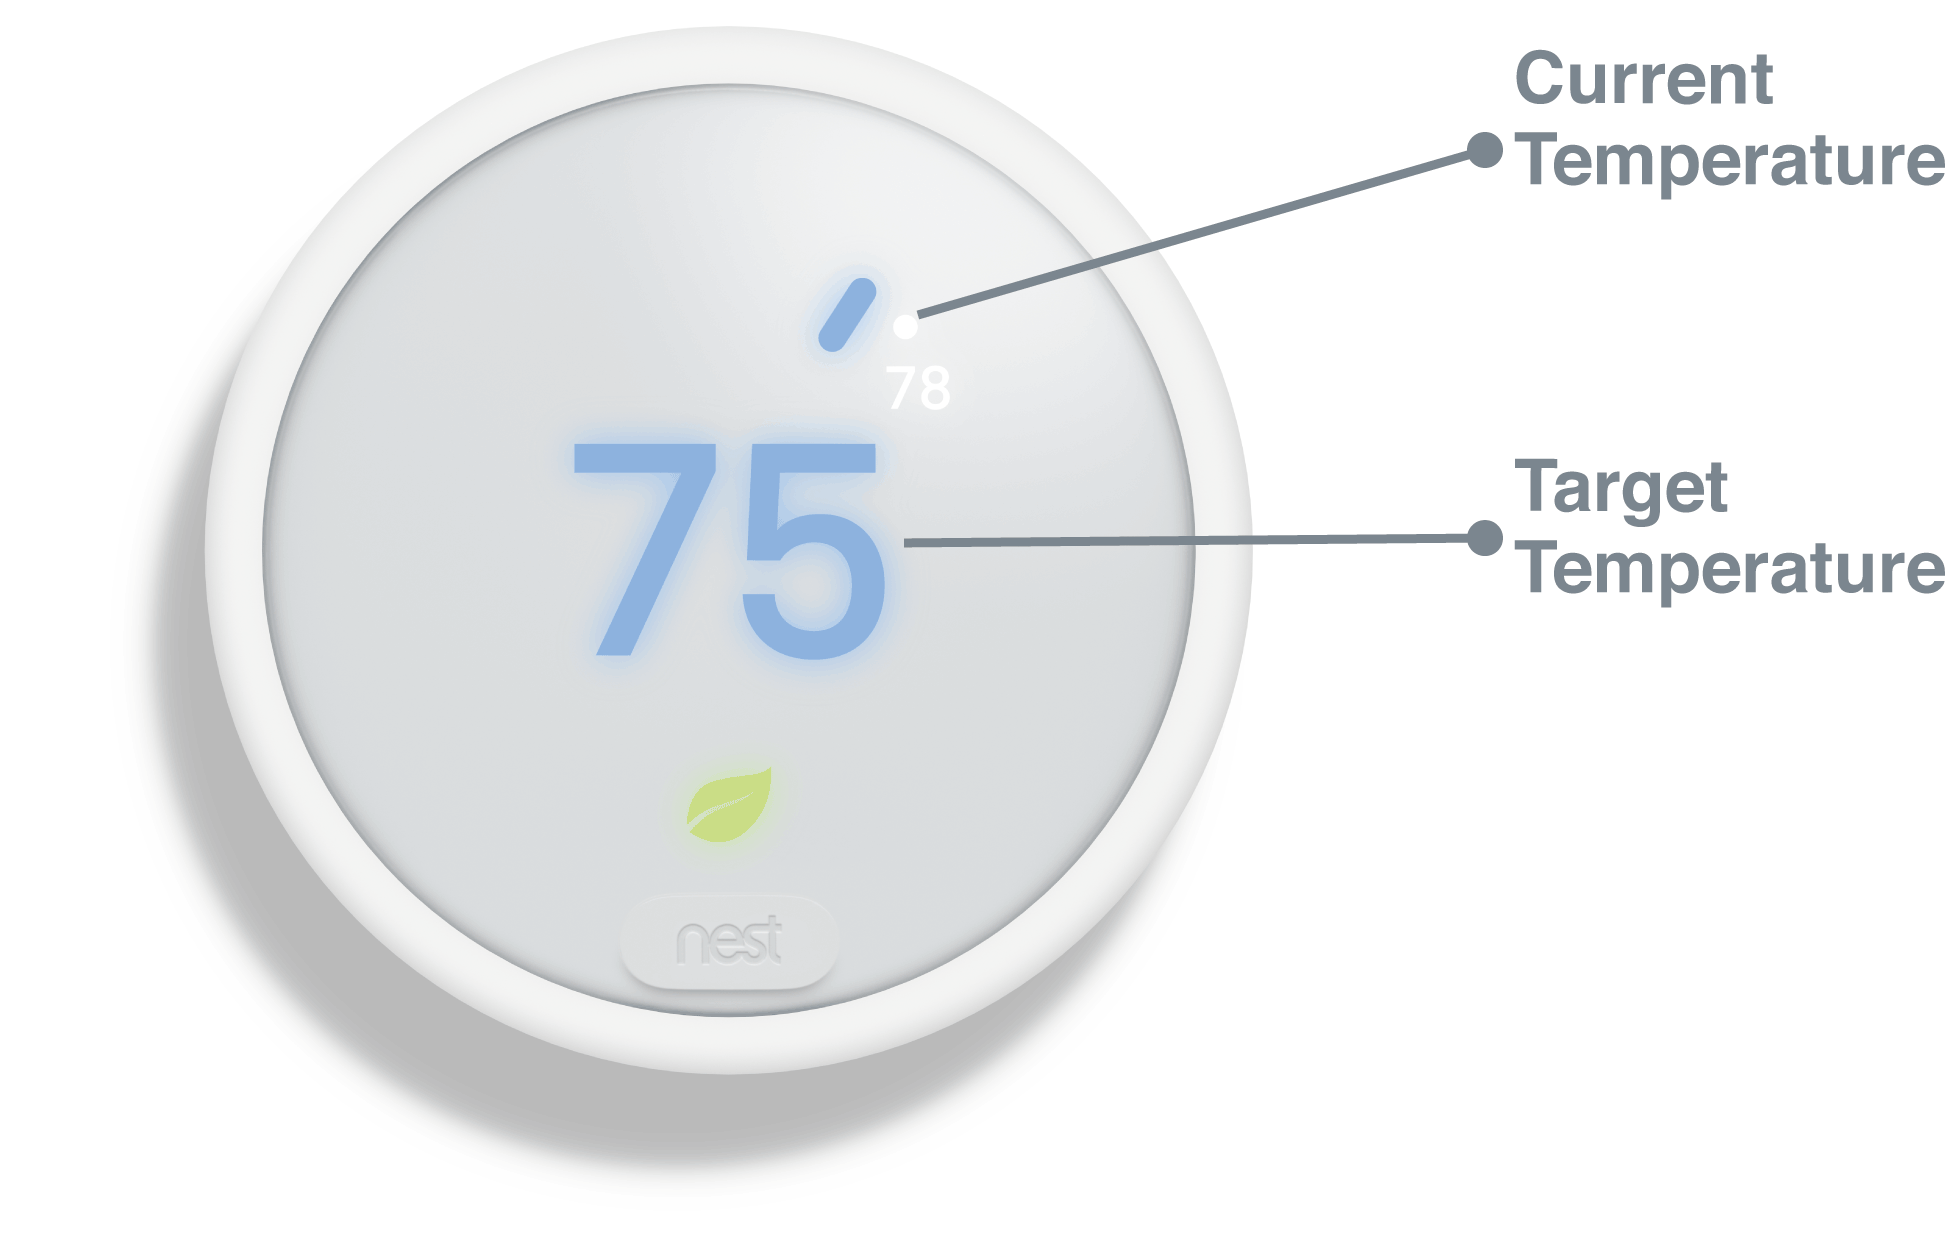 Nest Thermostat Logo - Learn about what you'll see on your Nest thermostat